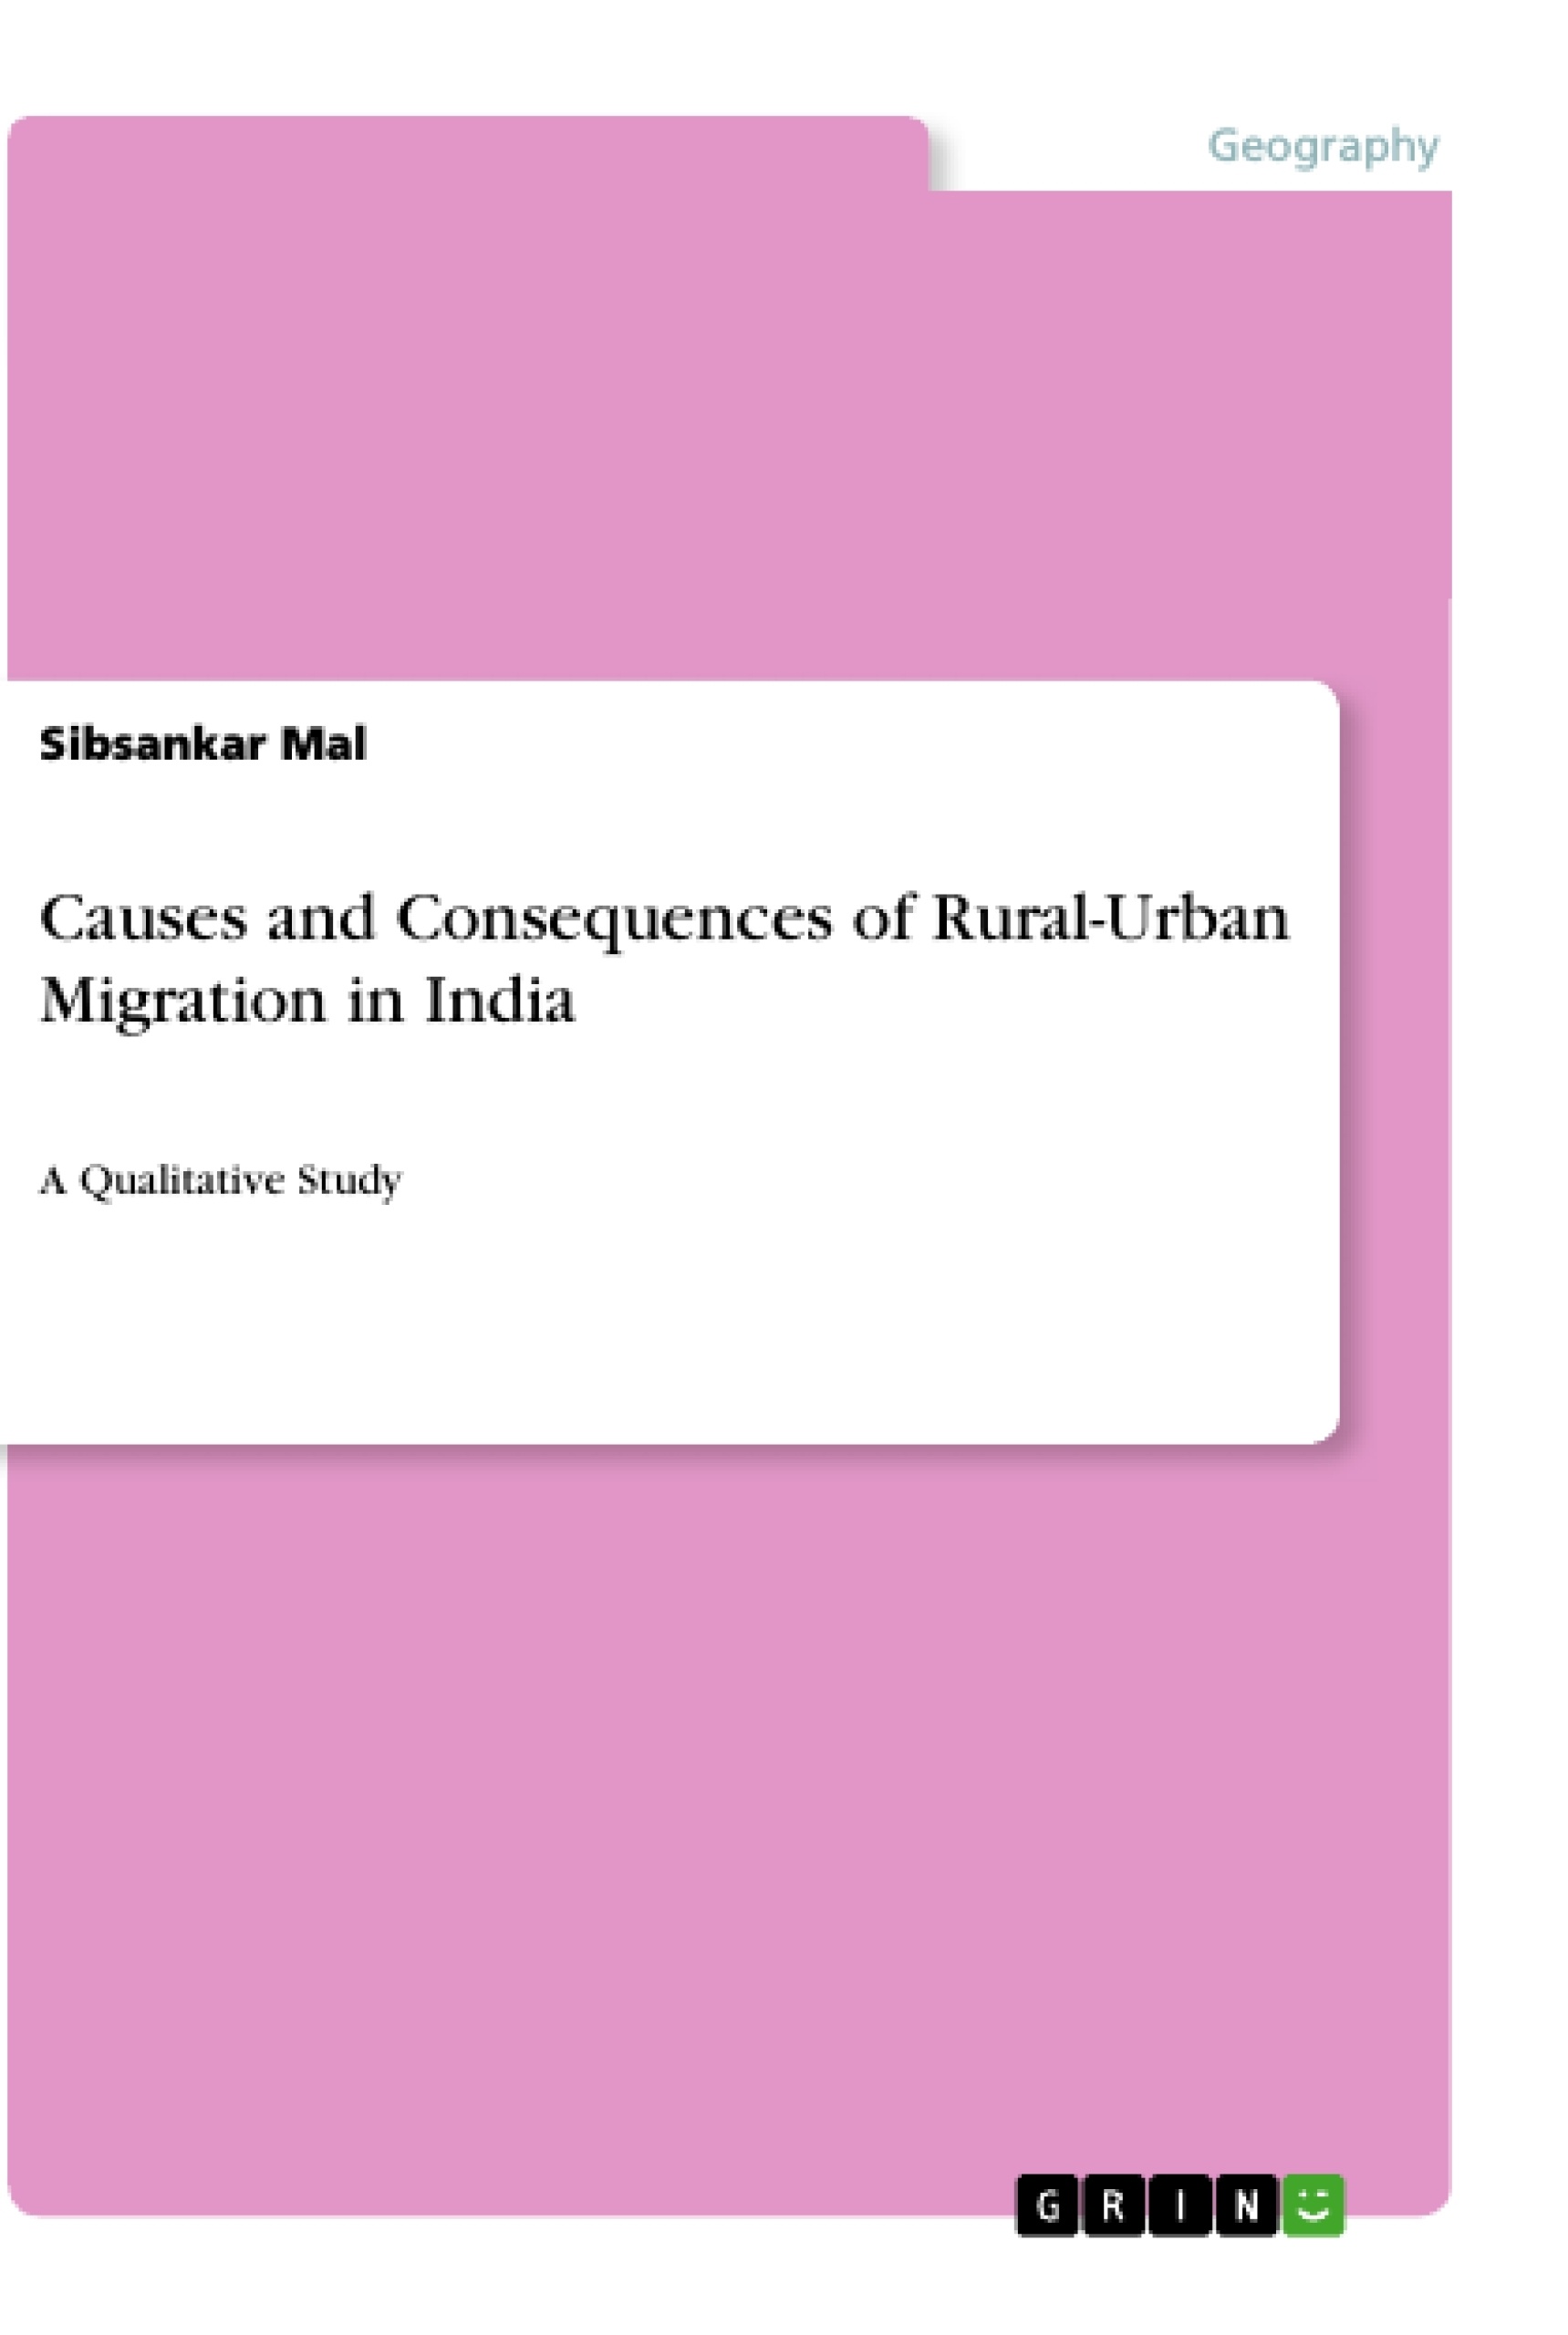 Title: Causes and Consequences of Rural-Urban Migration in India